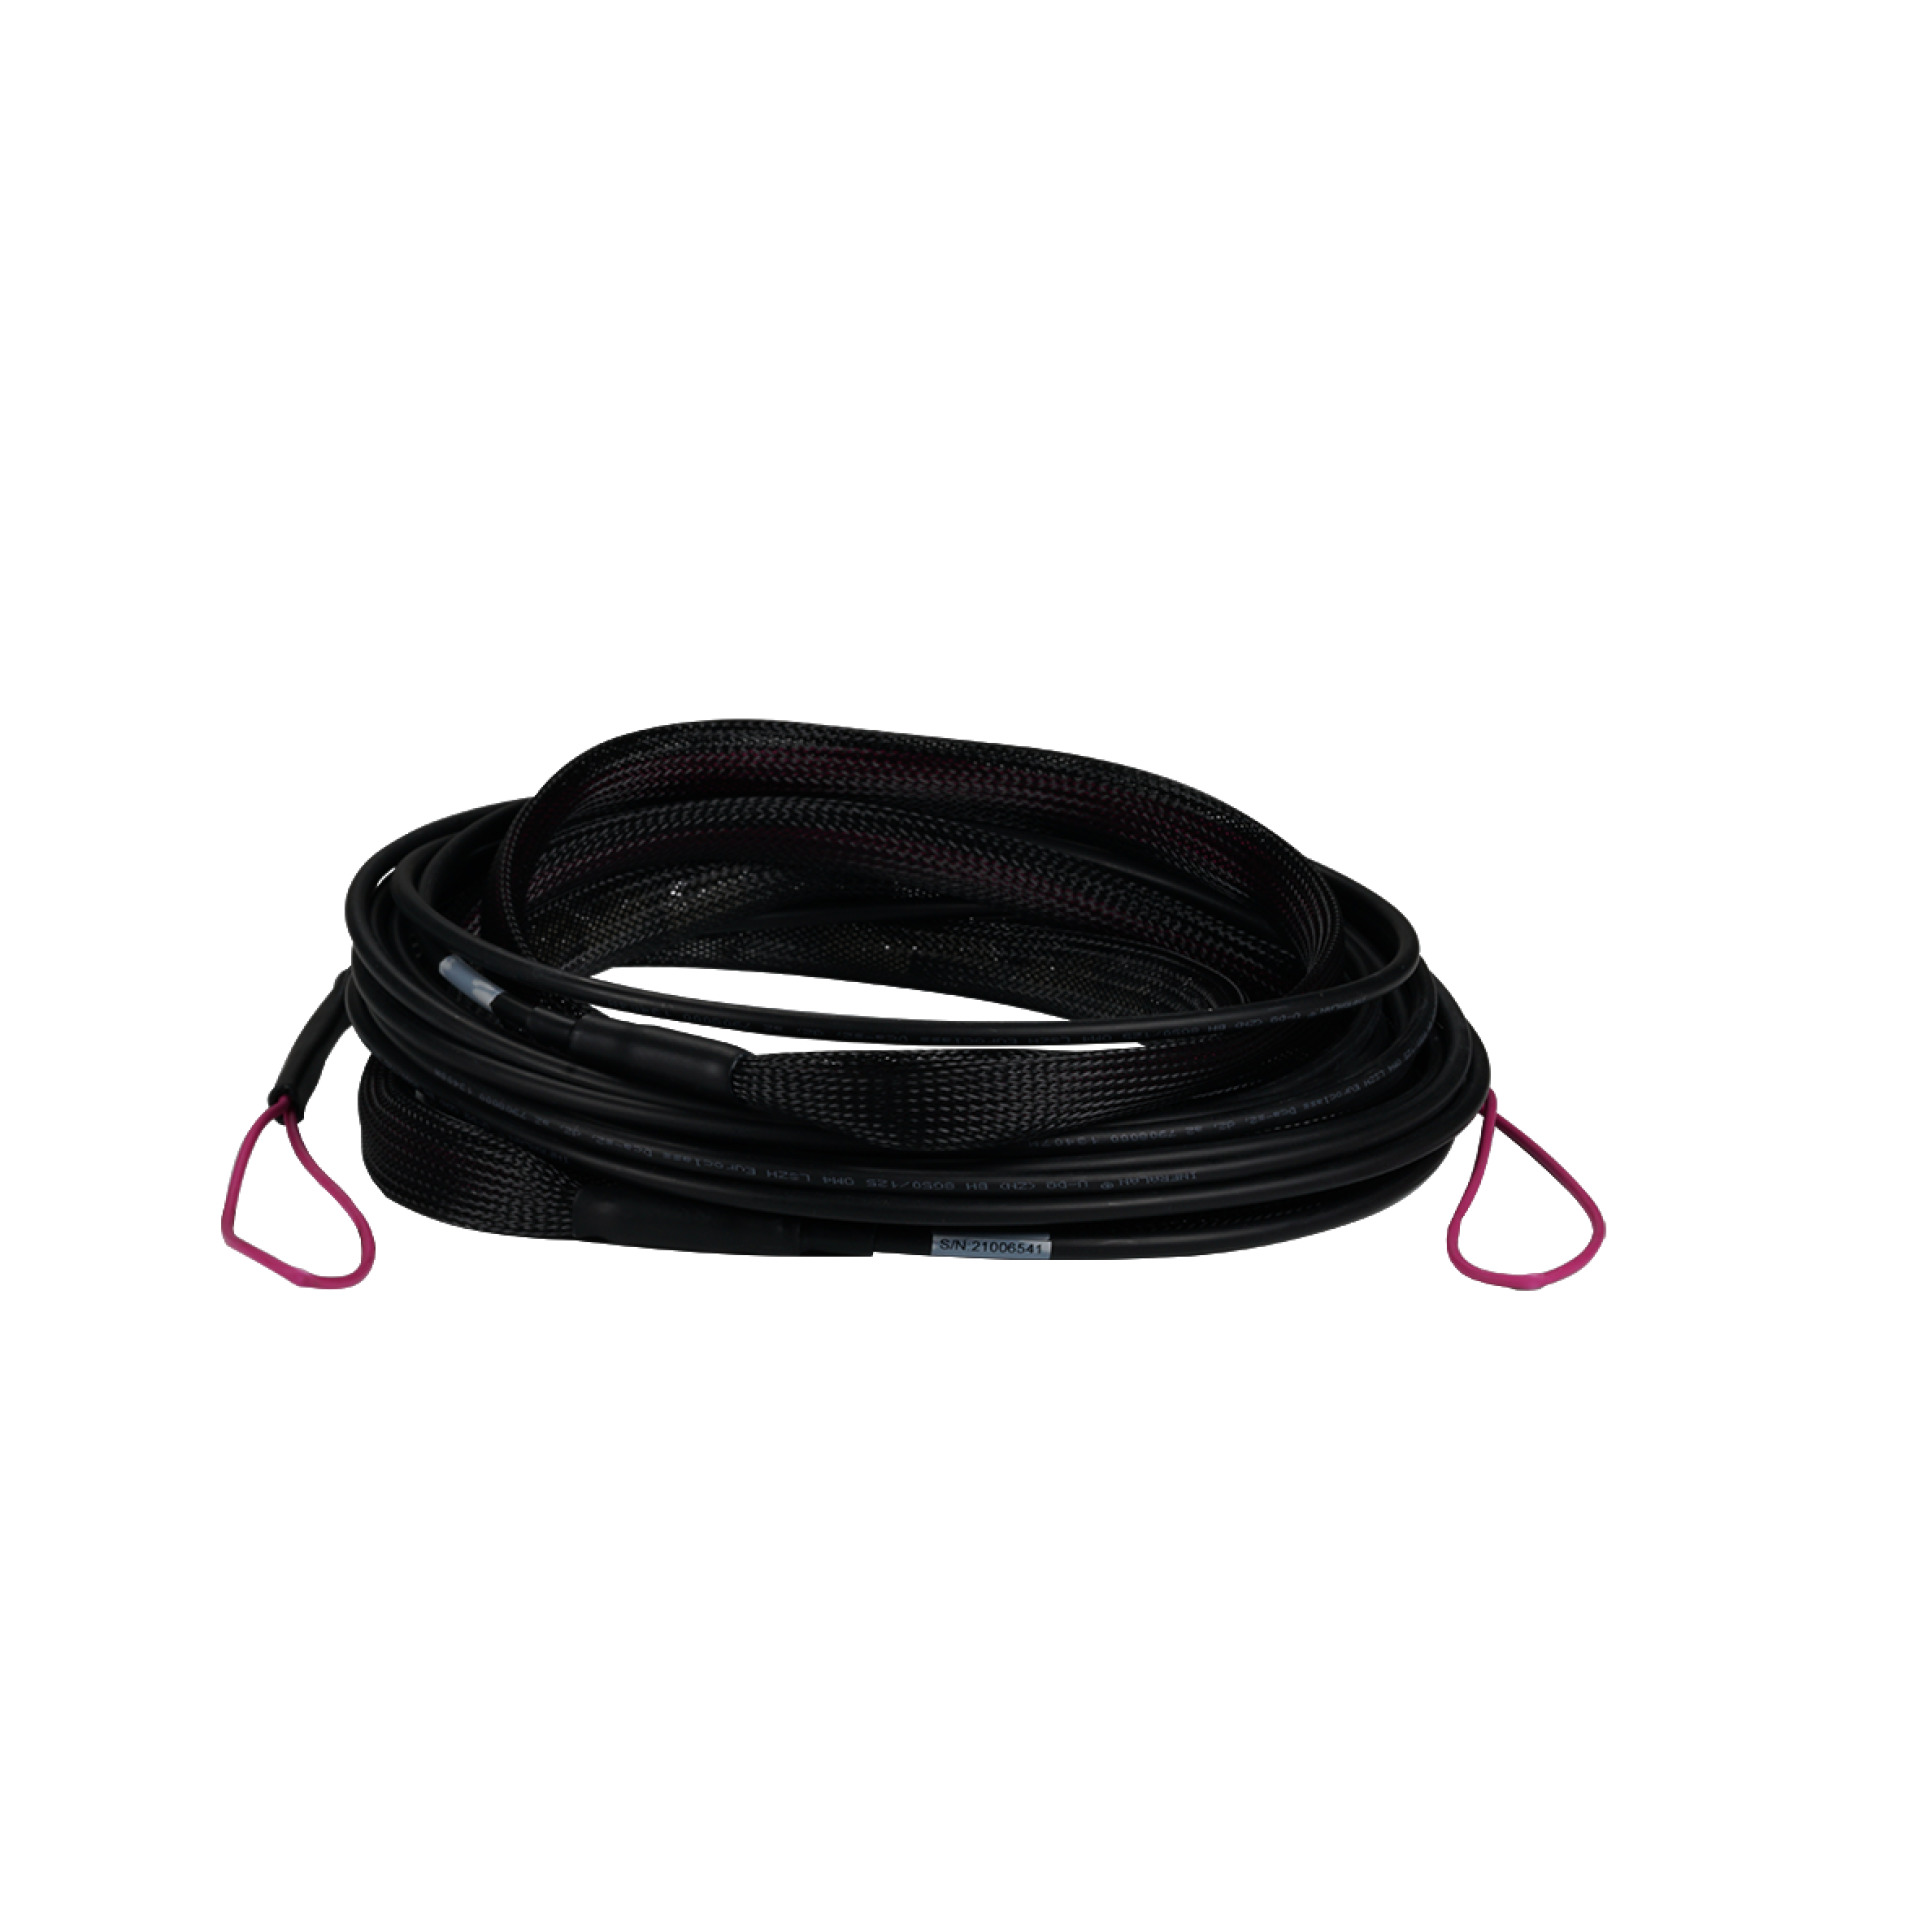 Trunk cable U-DQ(ZN)BH 4G 50/125, SC/SC OM4 110m